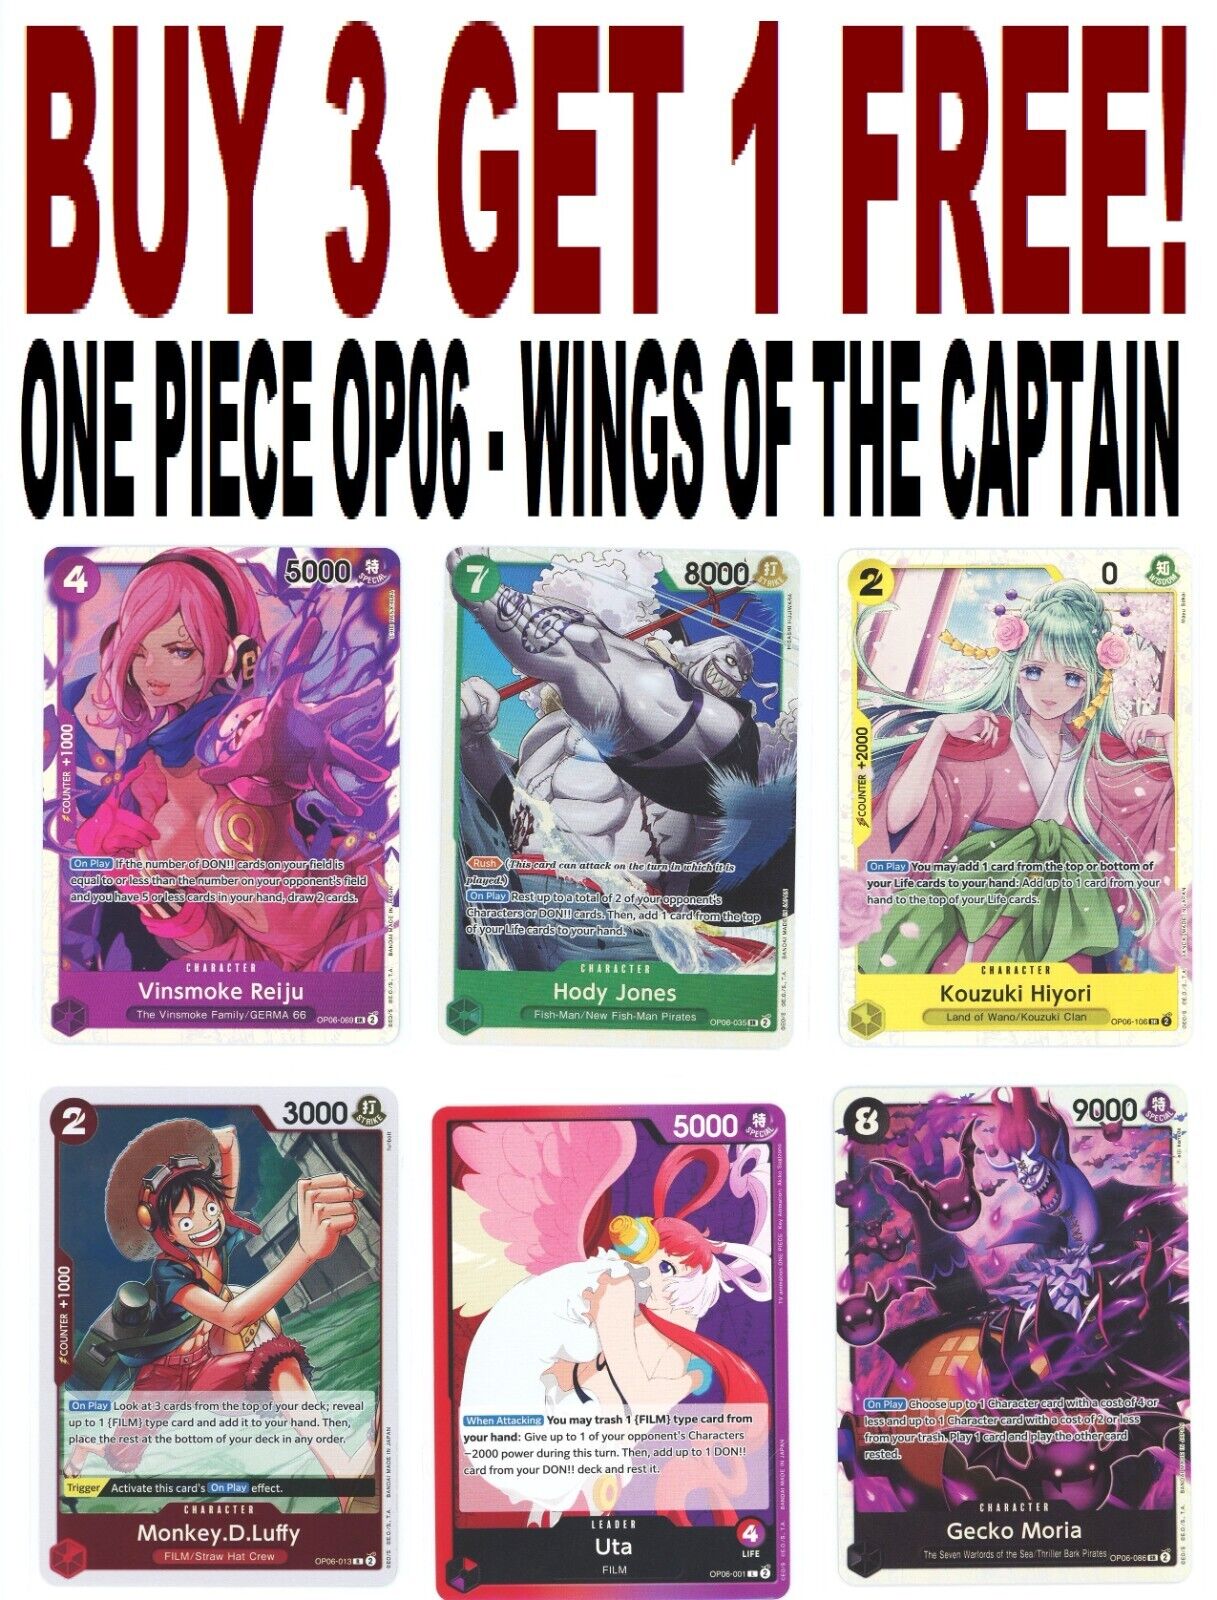 (ENGLISH) One Piece OP06 WINGS OF THE CAPTAIN You Pick/Choose (BUY 3 GET 1 FREE)